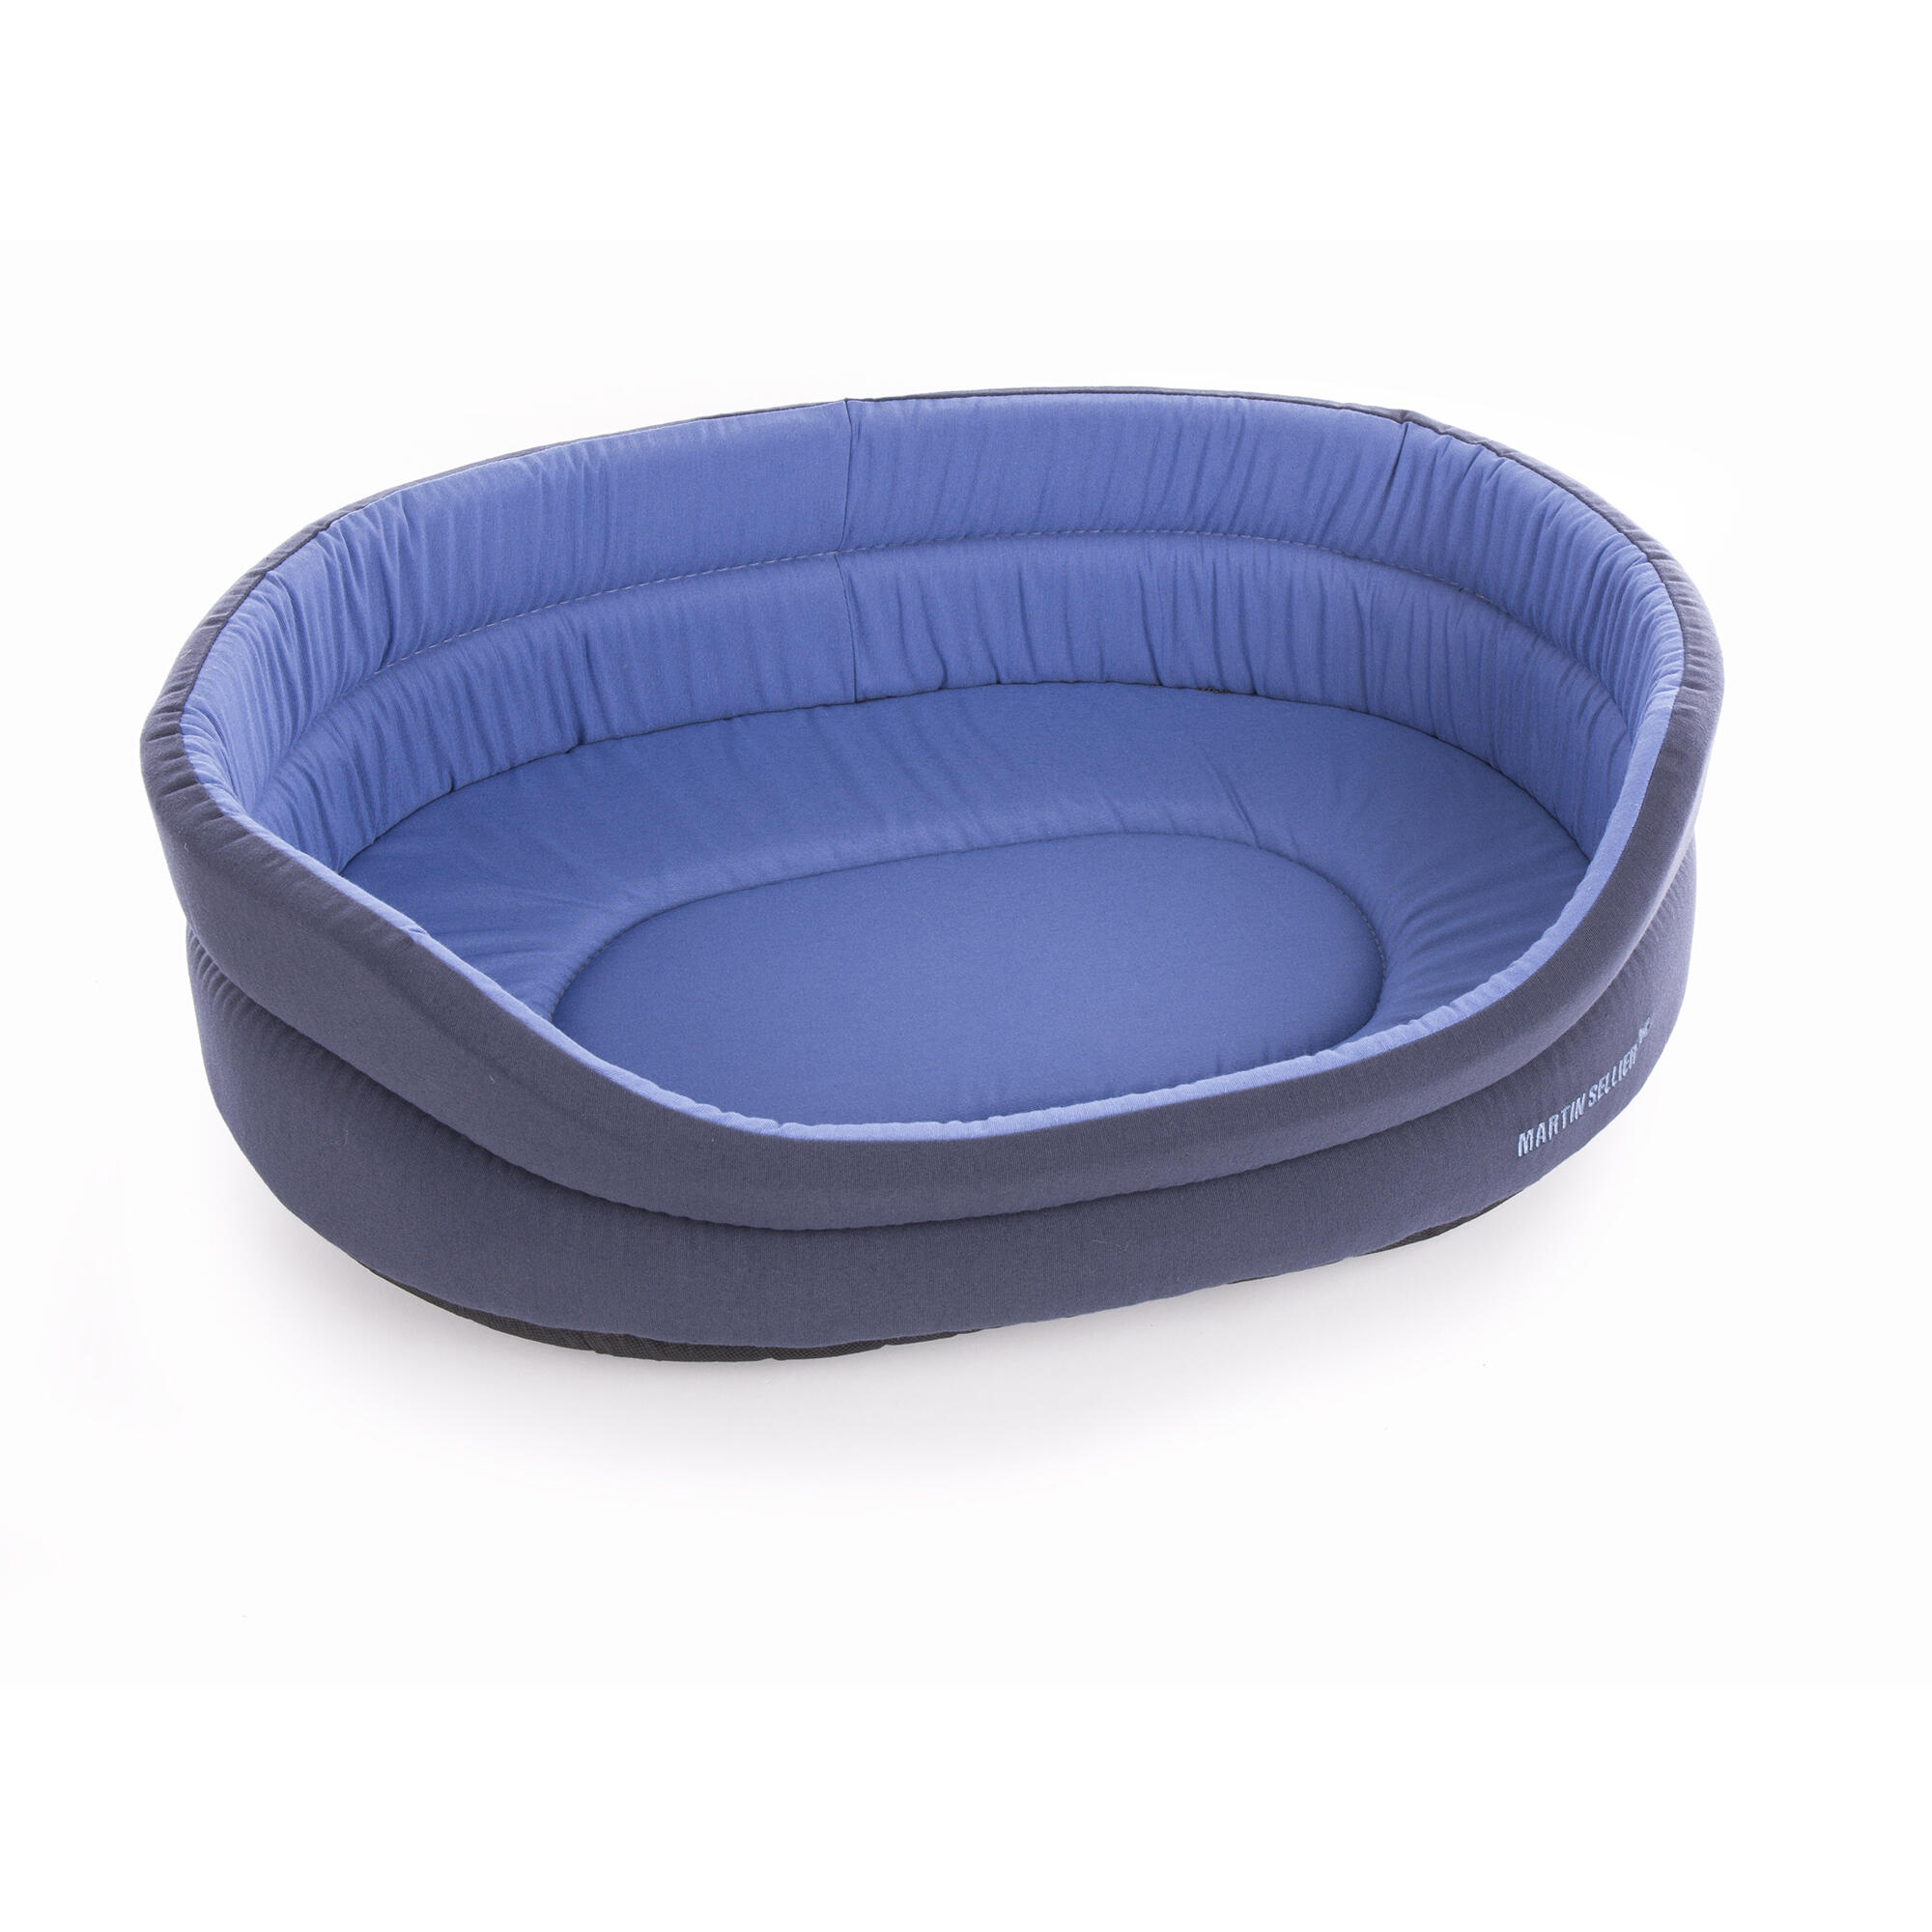 MARTIN SELLIER Dog bed + removable cushion in blue and mottled grey.